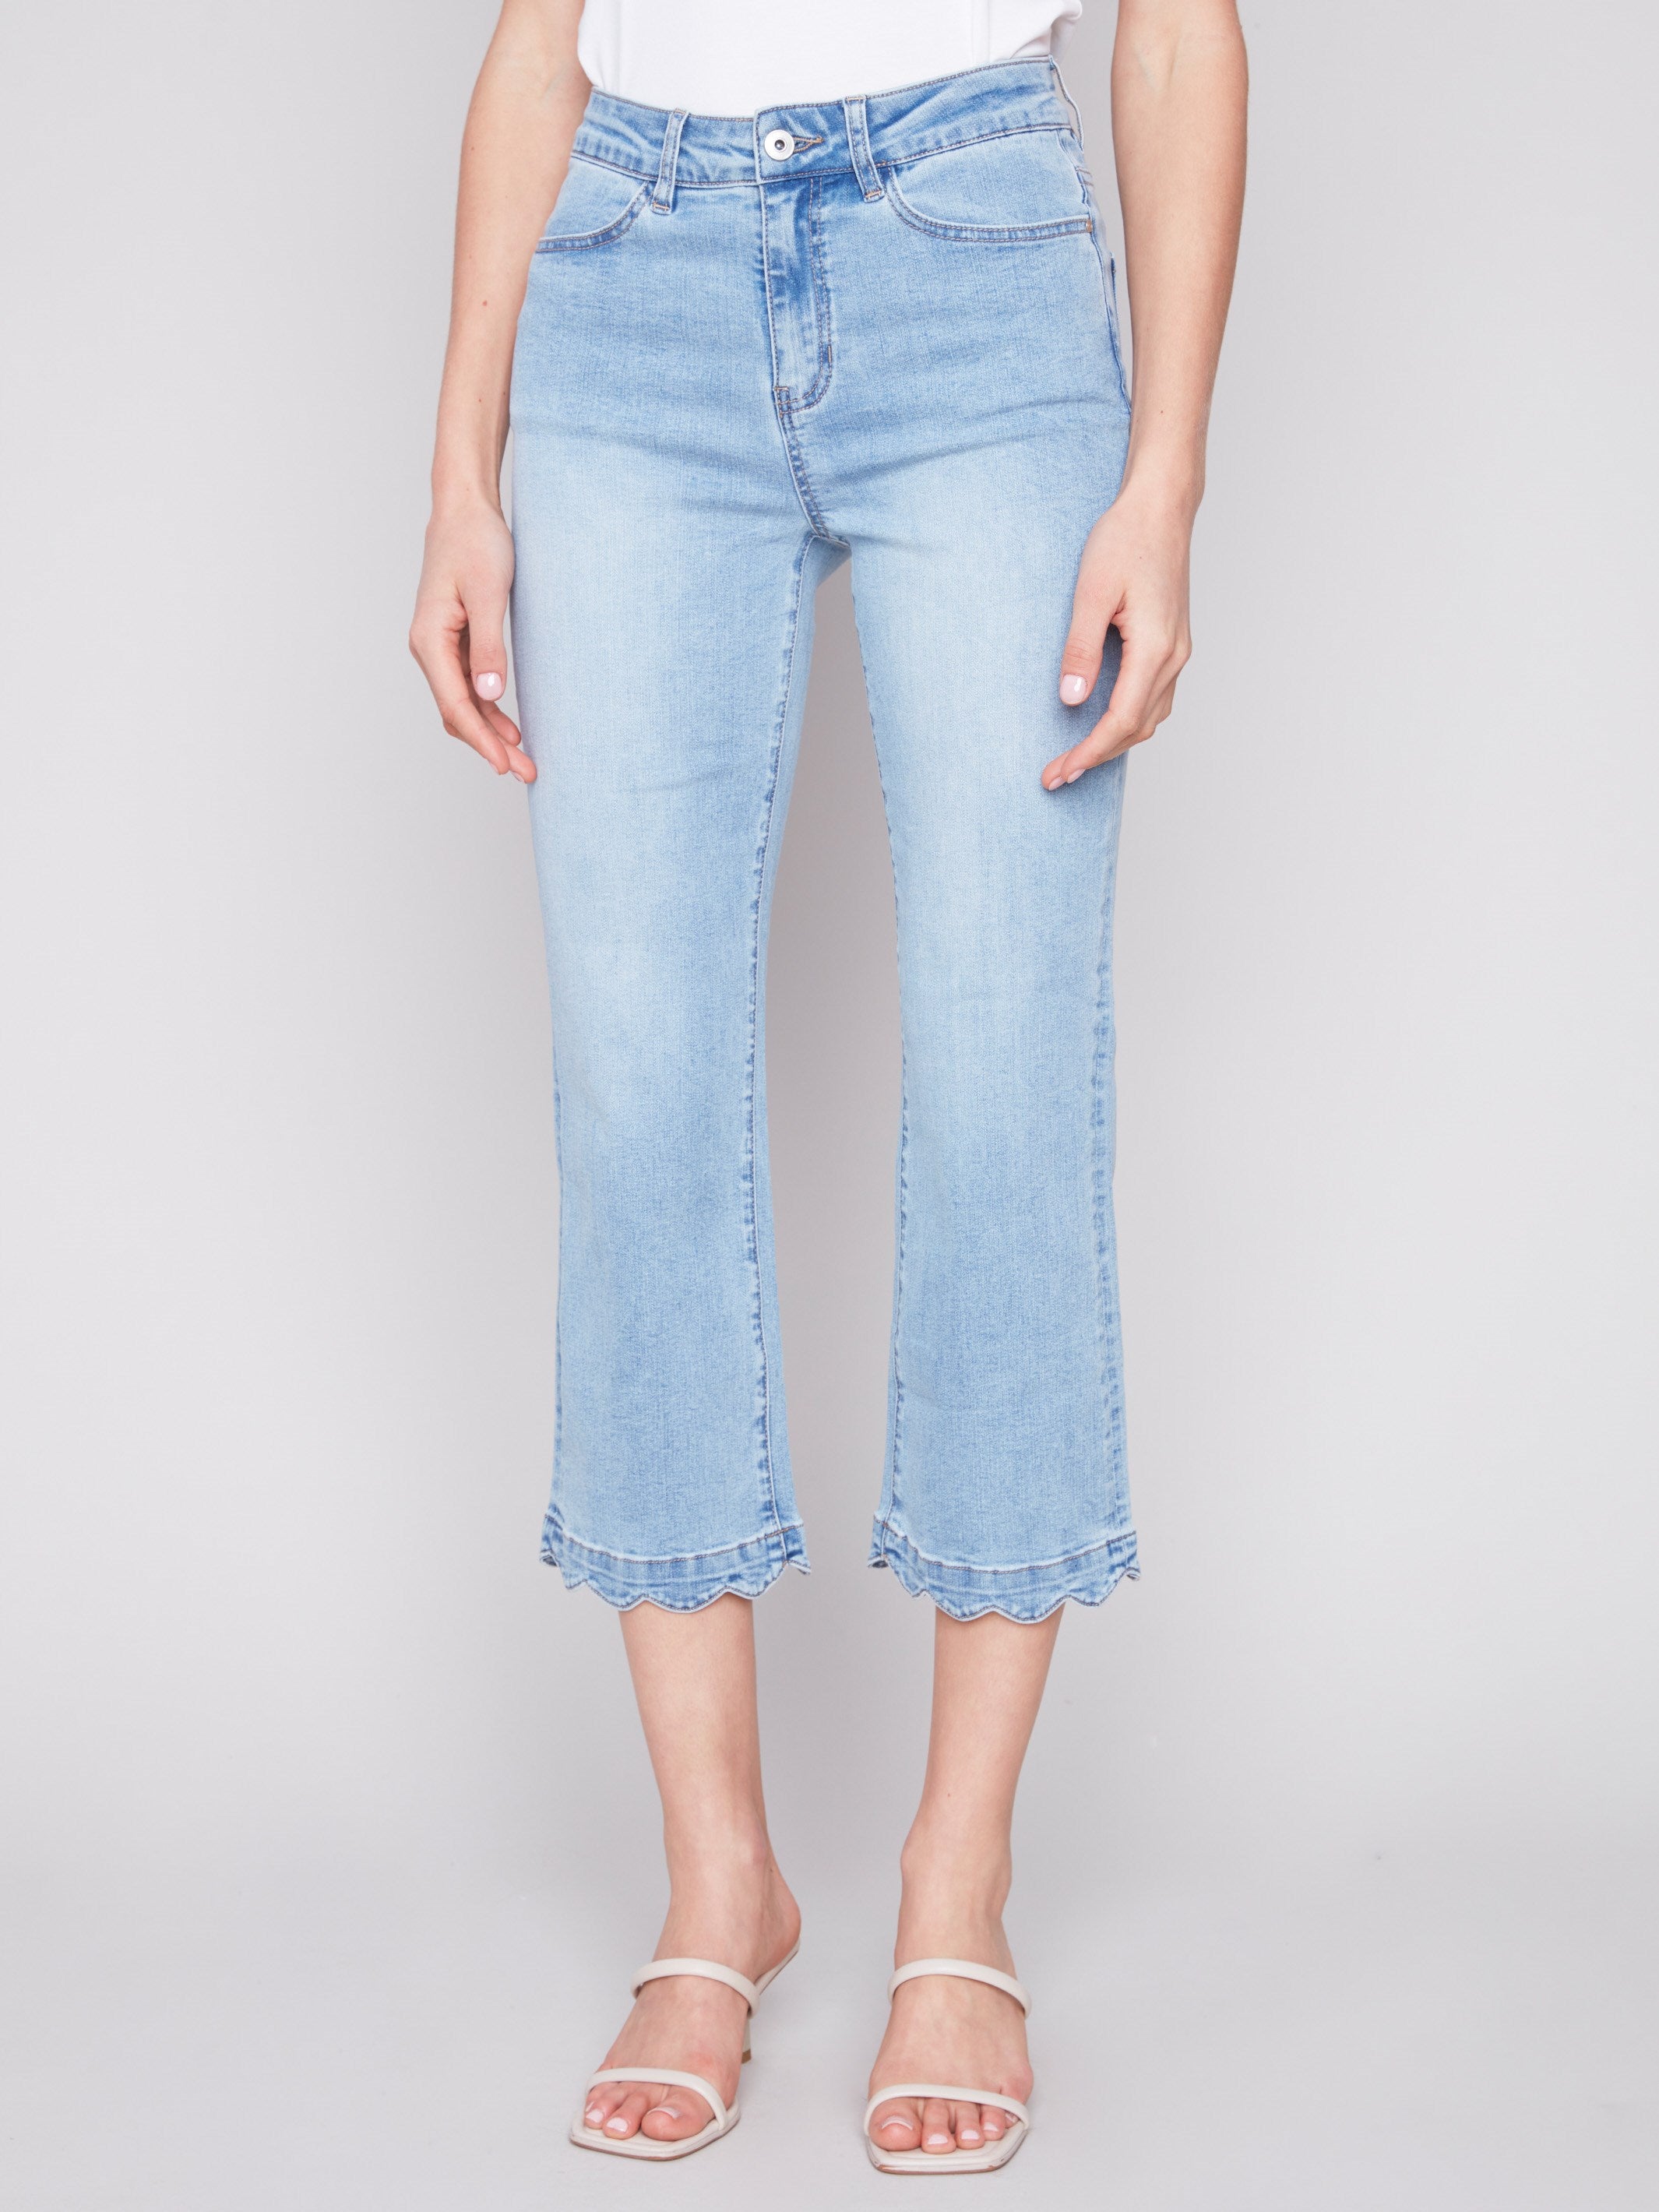 Straight Leg Jeans with Scallop Hem - Light Blue - Charlie B Collection Canada - Image 2